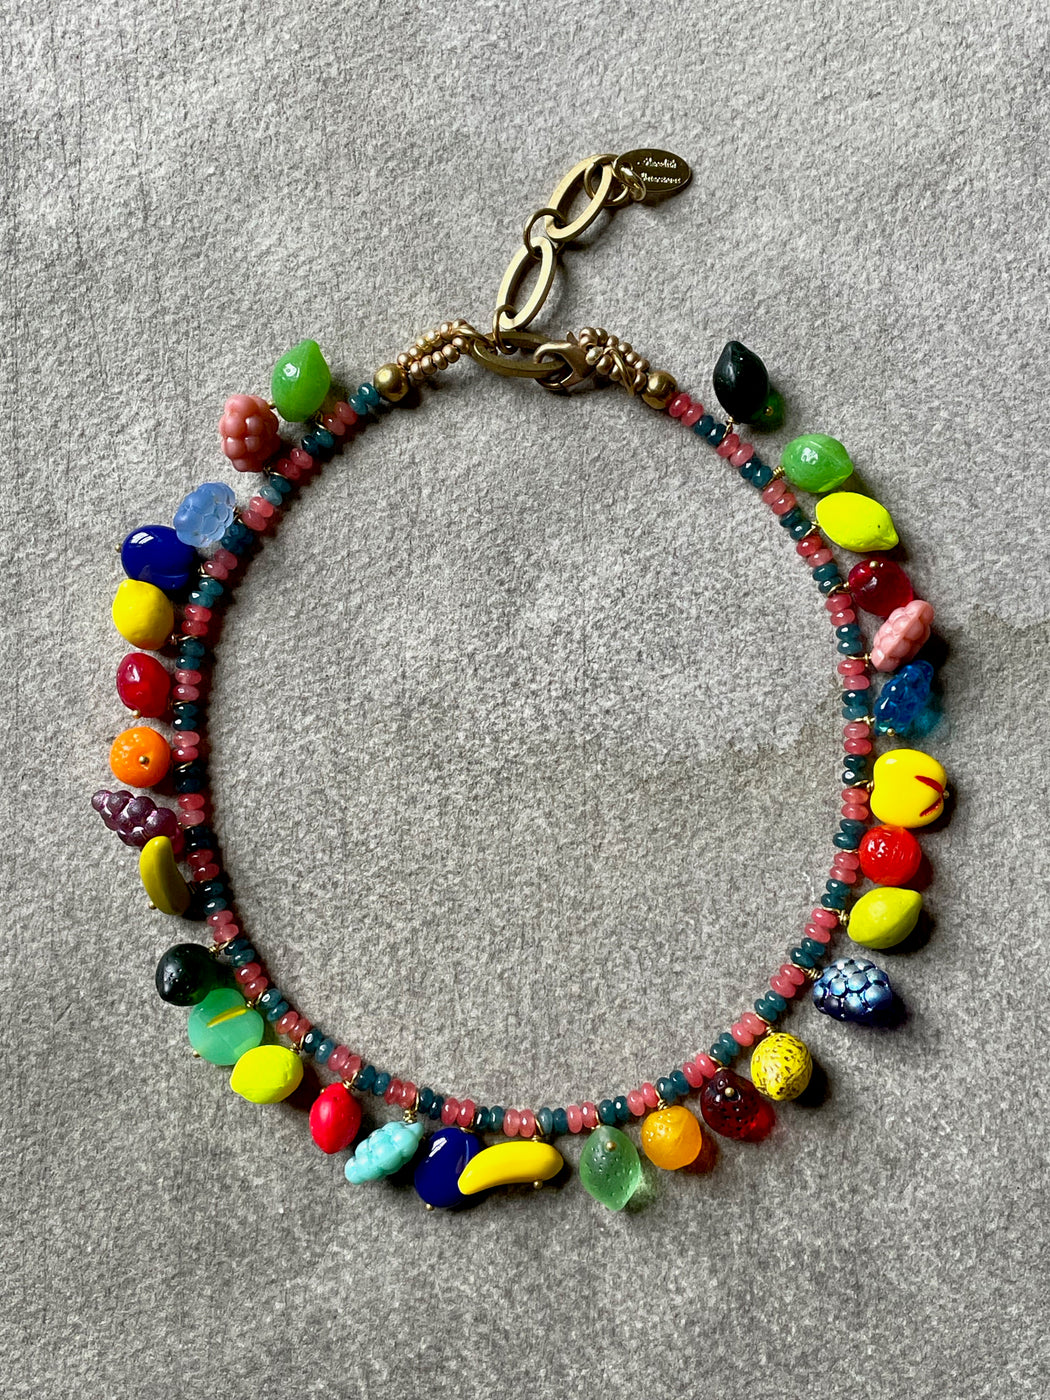 Vintage "Tutti Frutti" Necklace by Meredith Waterstraat